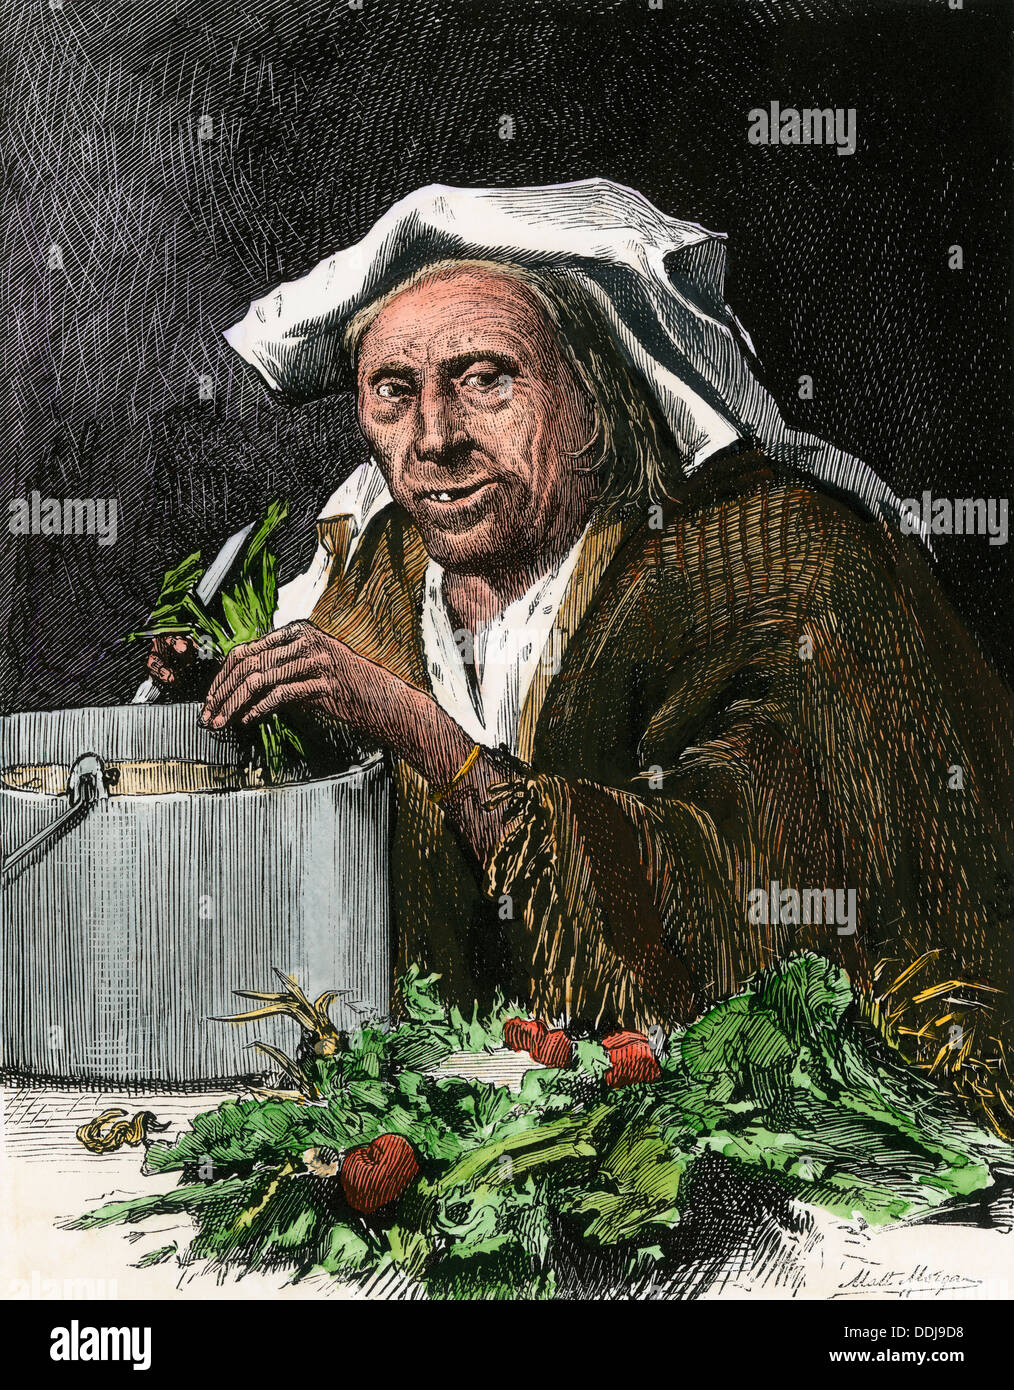 Italian-American grandmother preparing soup for supper, New York City, 1870s. Hand-colored woodcut Stock Photo